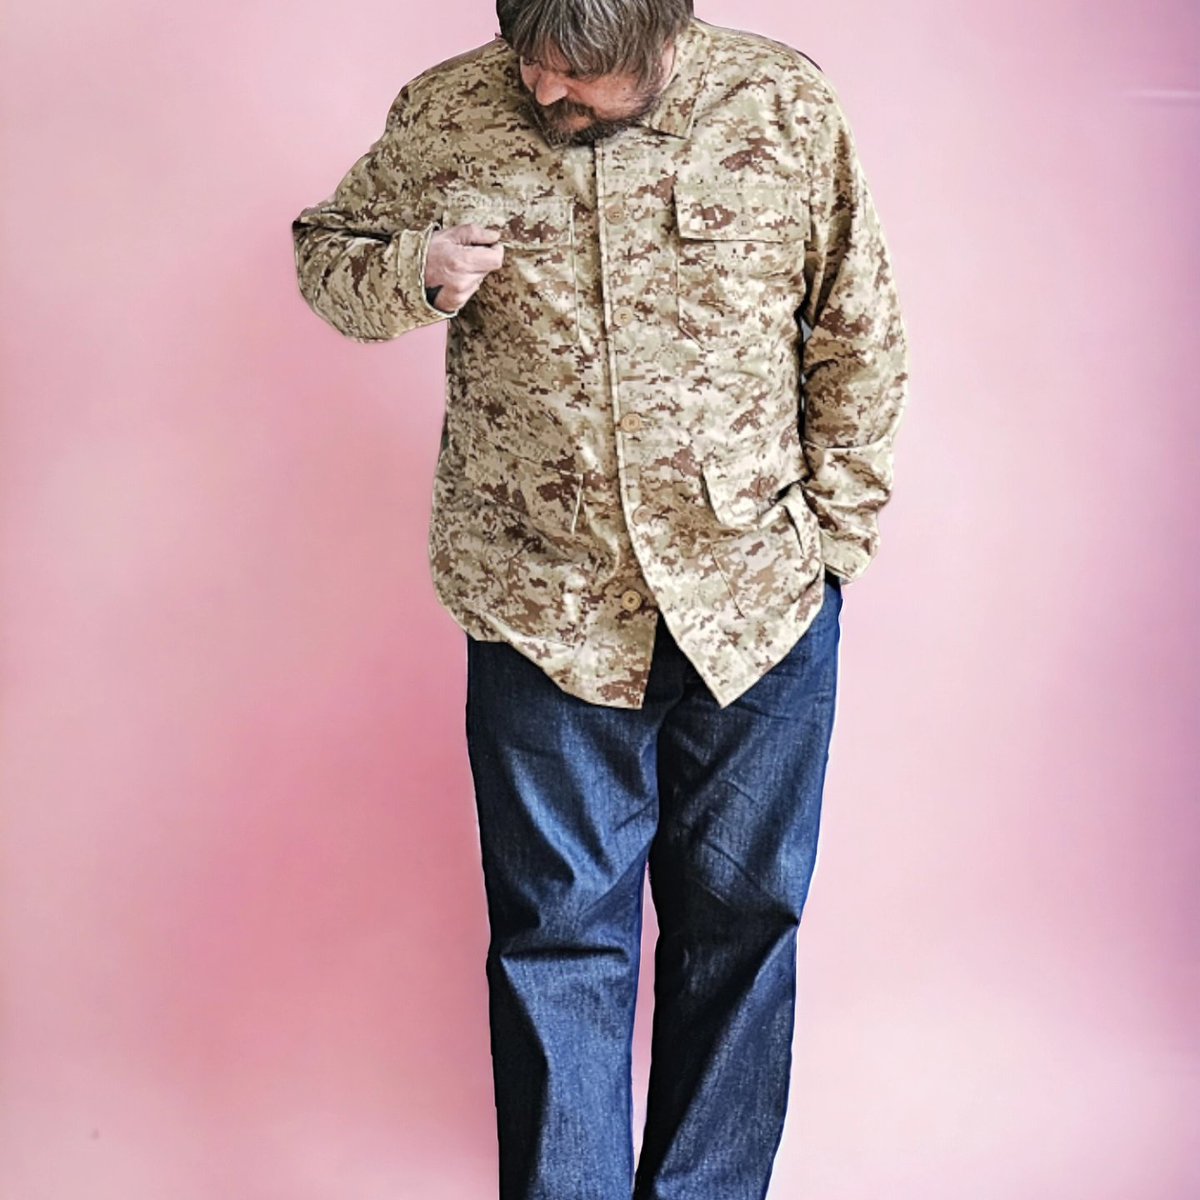 Support indie labels New camo overshirt out now only £65 for a limited edition piece with all money going to a small business not a massive corporation or shareholders new boat Humblegentssocialclub.com